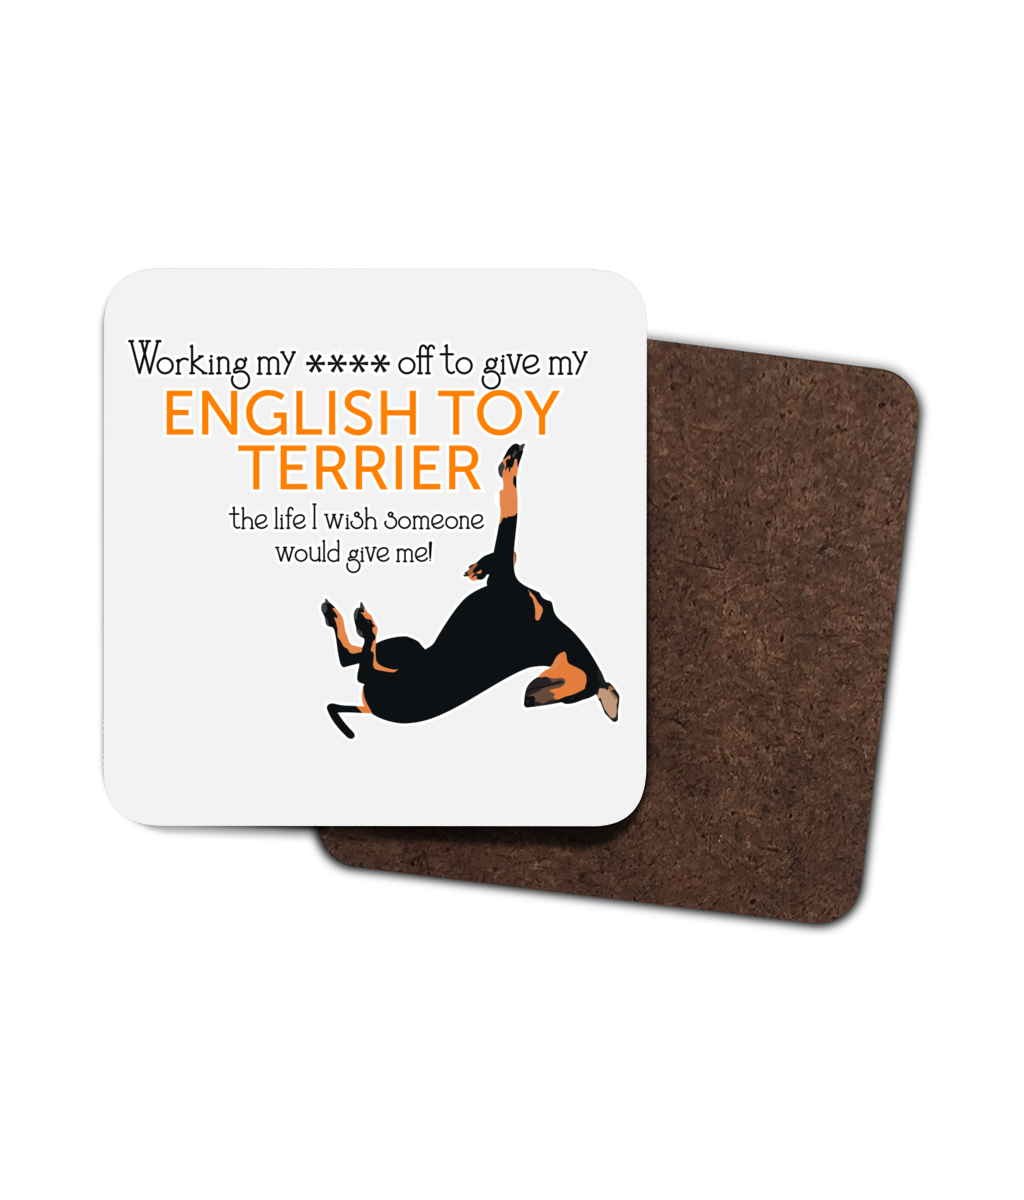 Single English Toy Terrier Working My ****s Off! Coaster